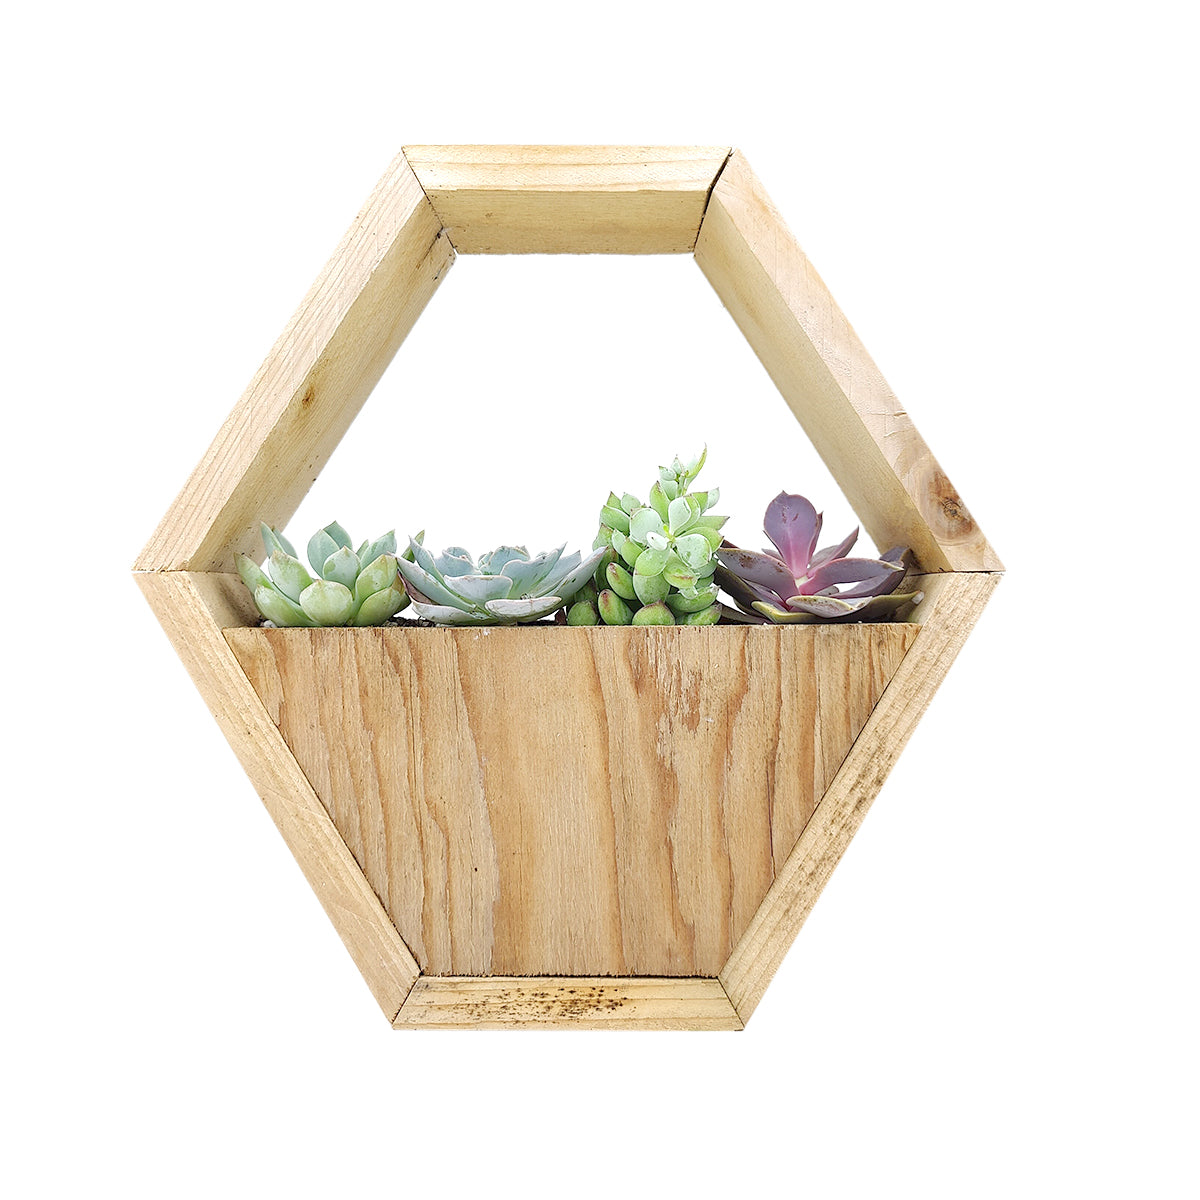 Live Succulent Arrangment in Hexagon Wall Planter for sale, Plant wedding gift, Plant birthday gift, Sustainable Gift, Wooden Wall Planter